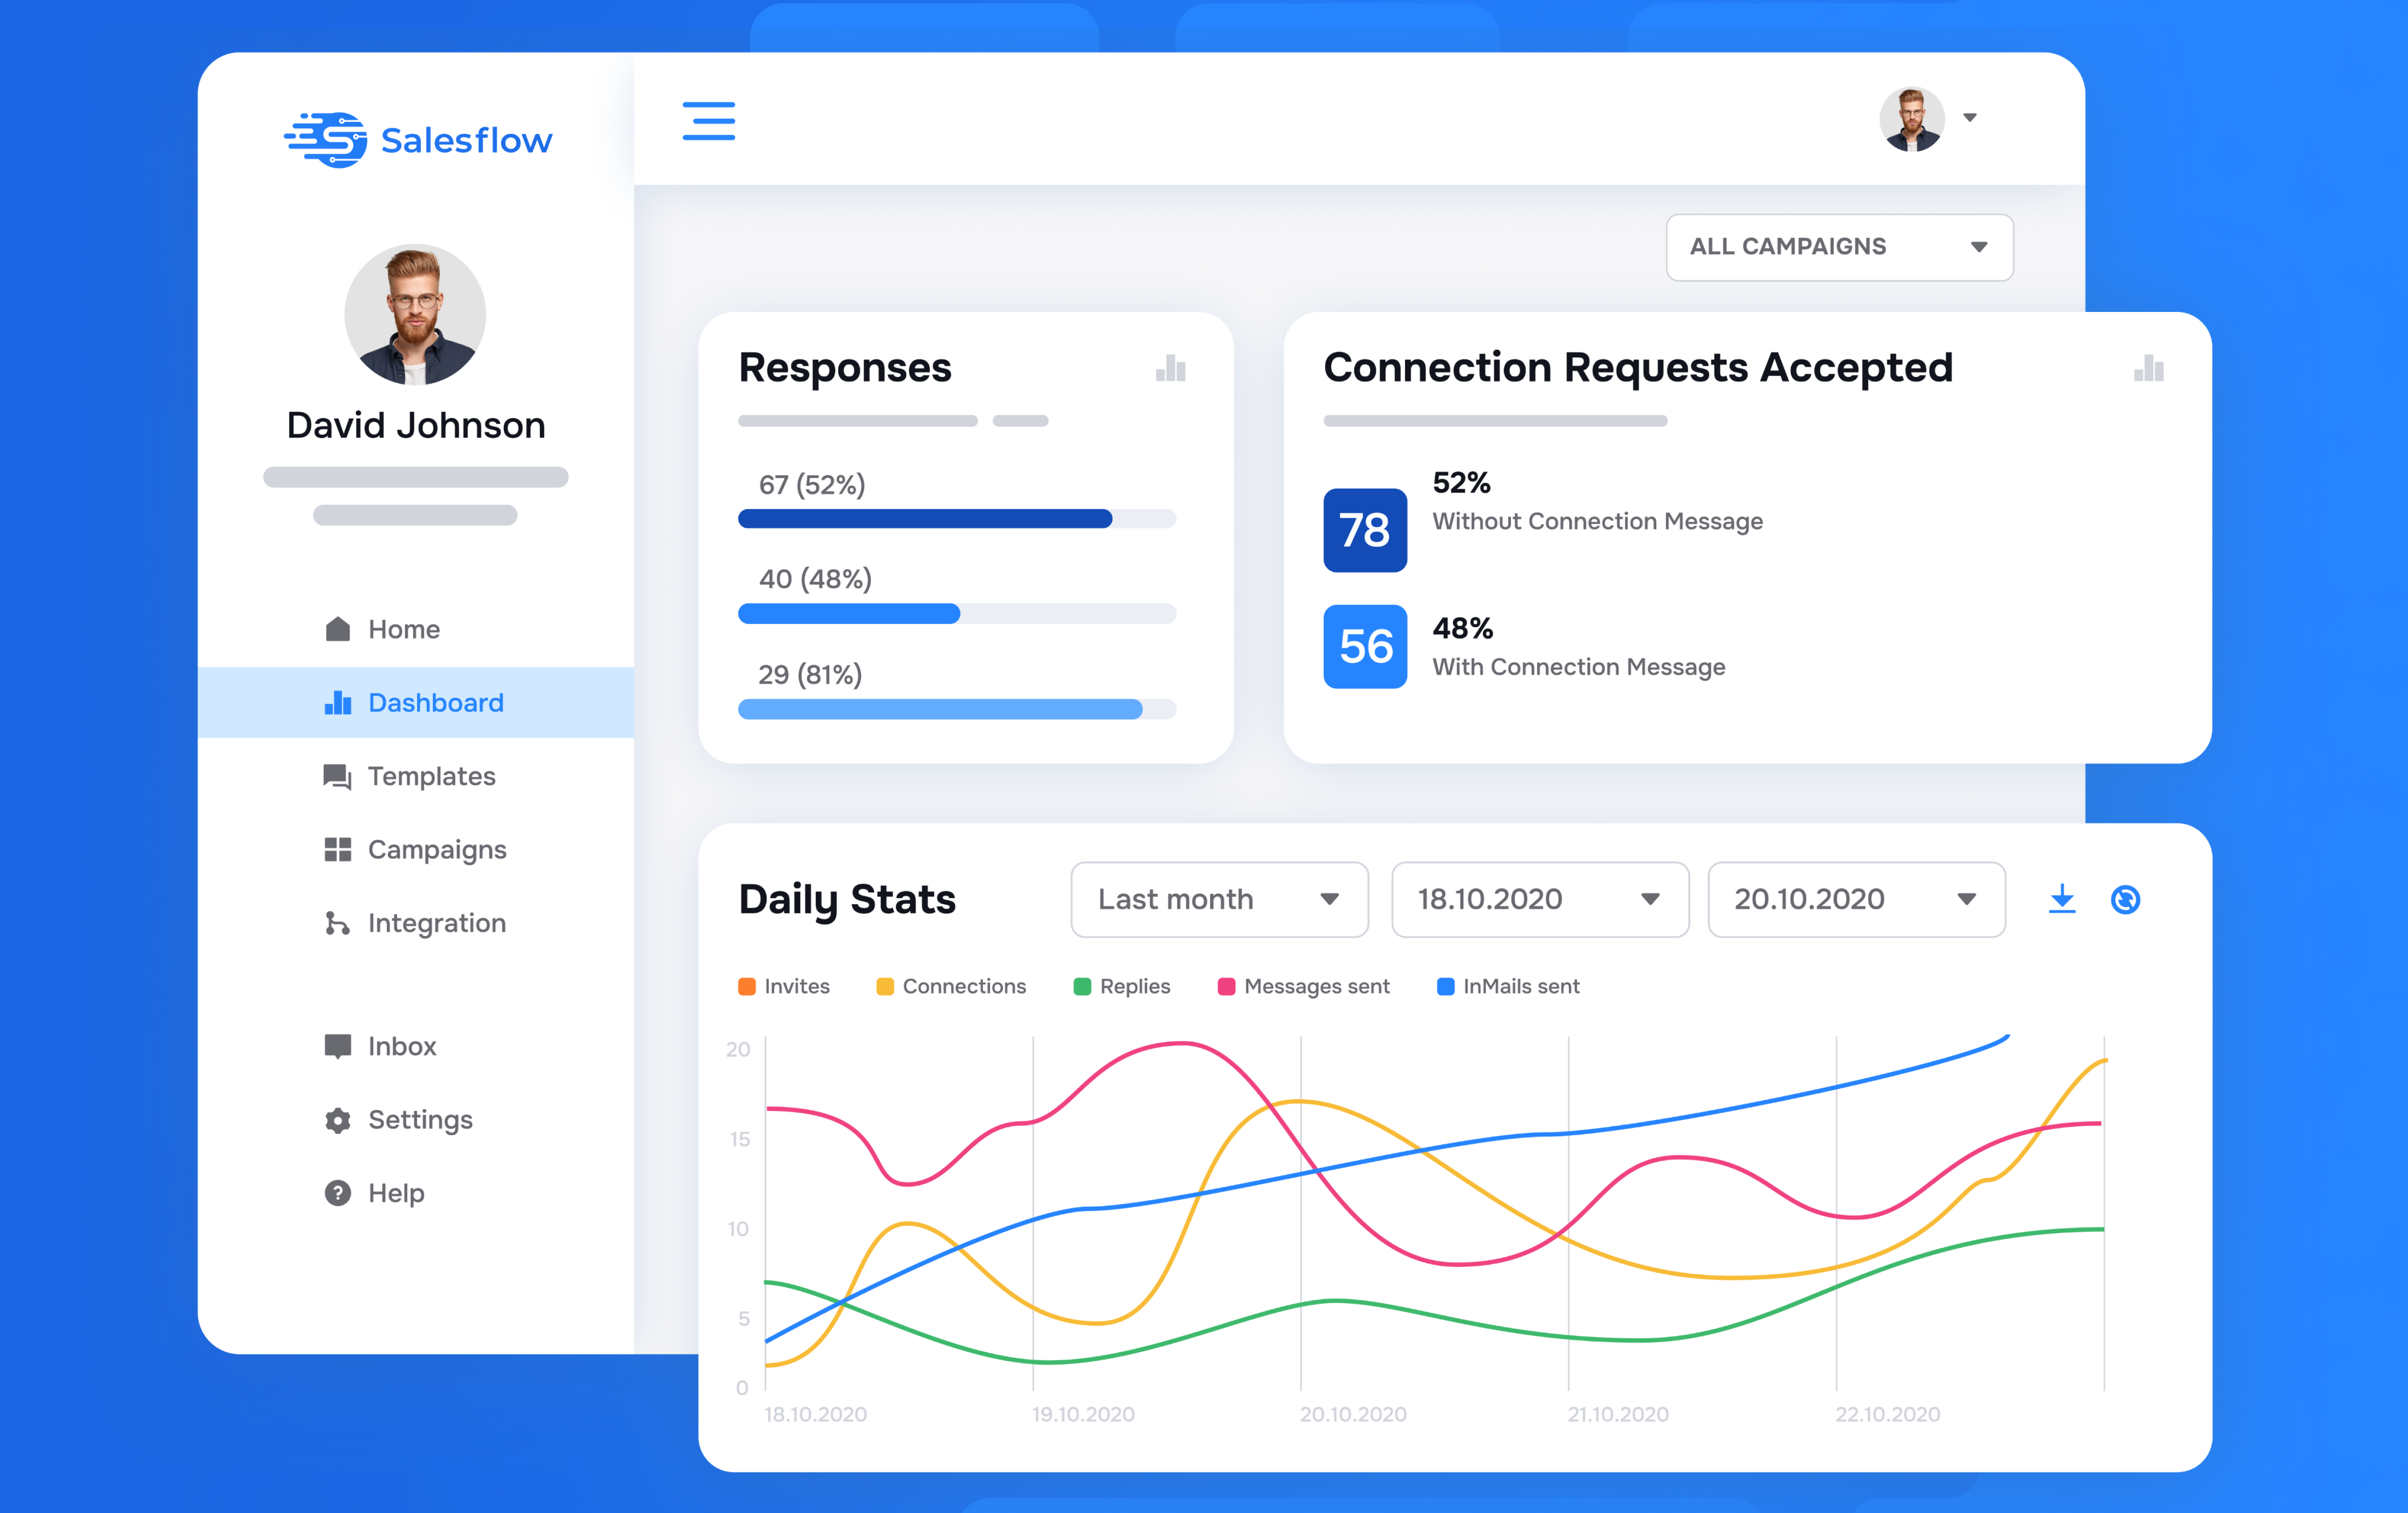 Salesflow Software - Get live key insights on your campaigns. Understand your connection volumes & response rates. What gets measured gets managed, track your numbers, see what’s working and make necessary adjustments to improve your results.